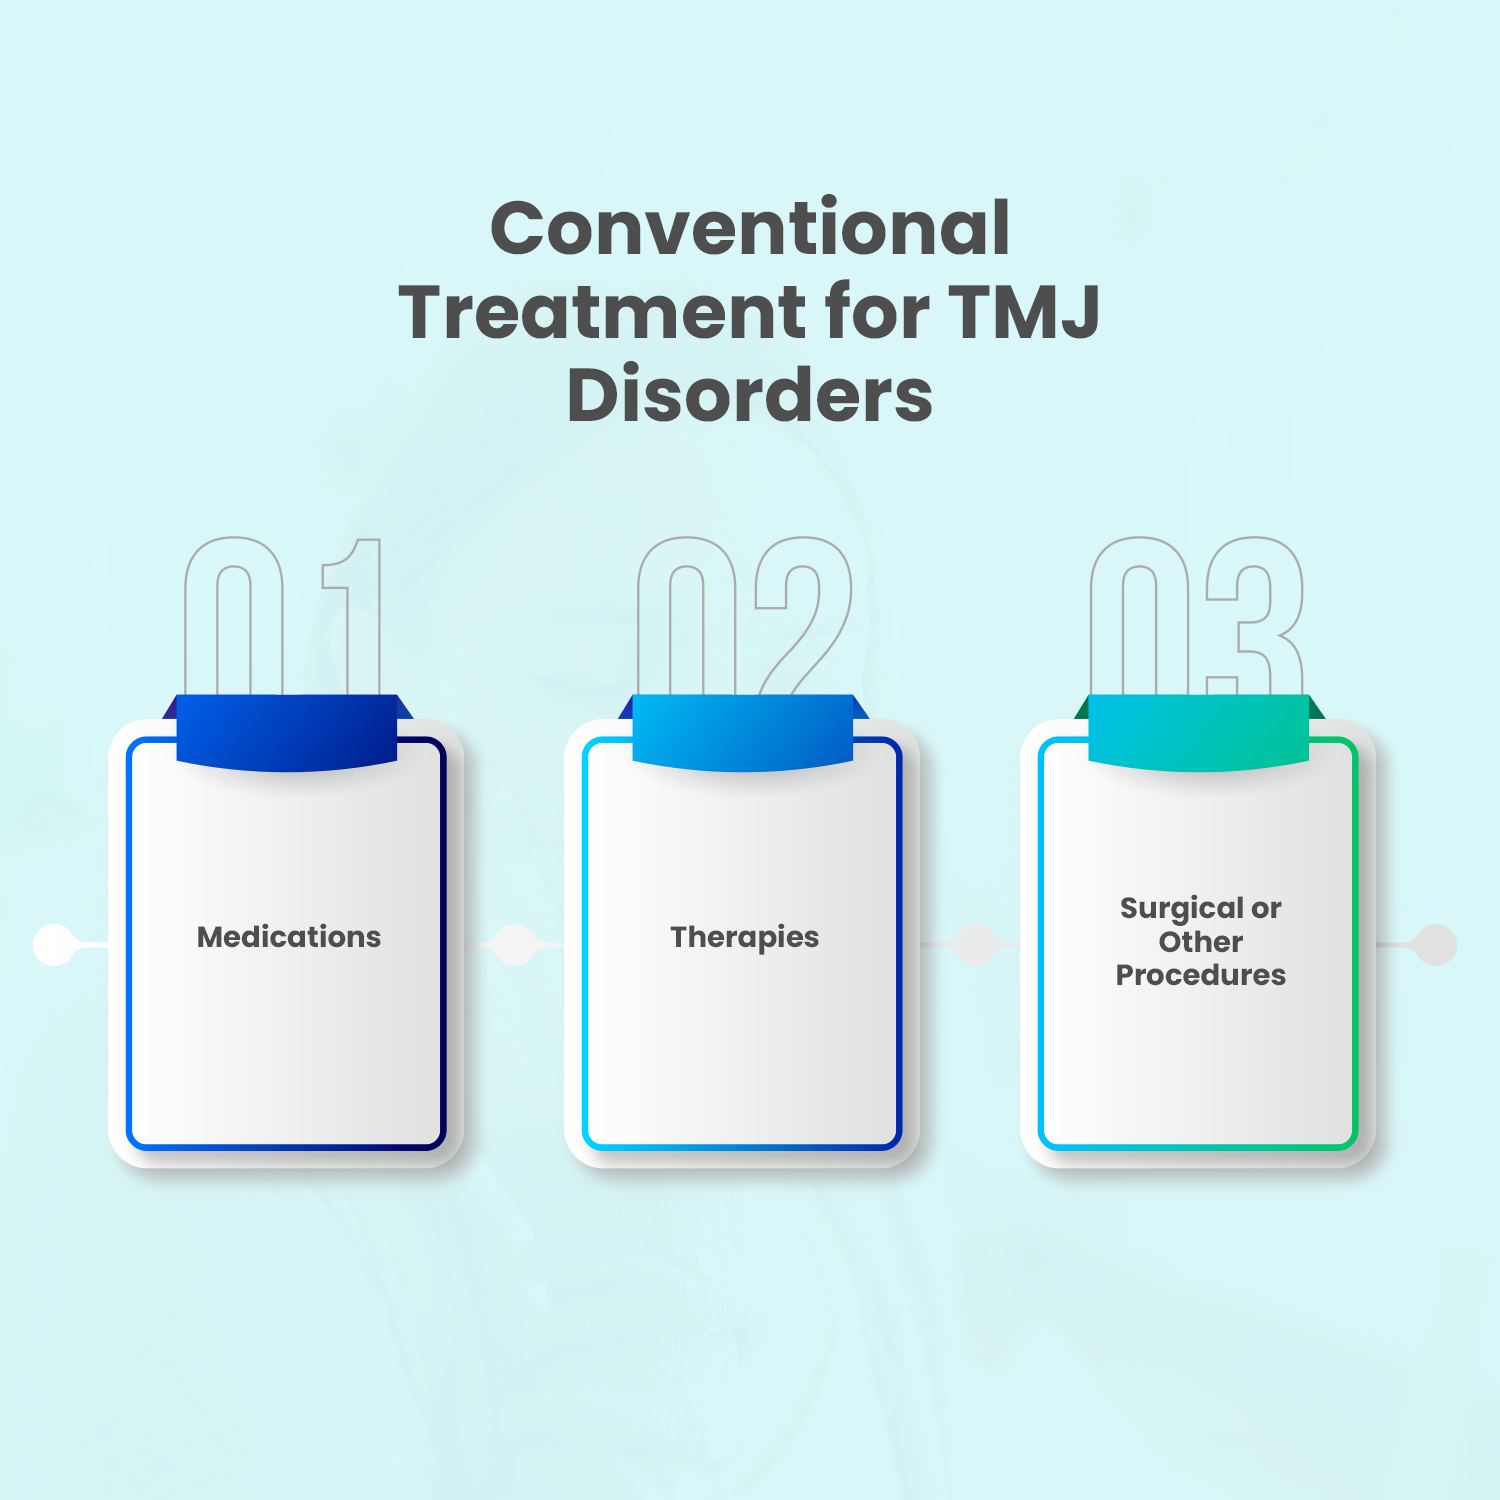 Conventional Treatment for TMJ Disorders